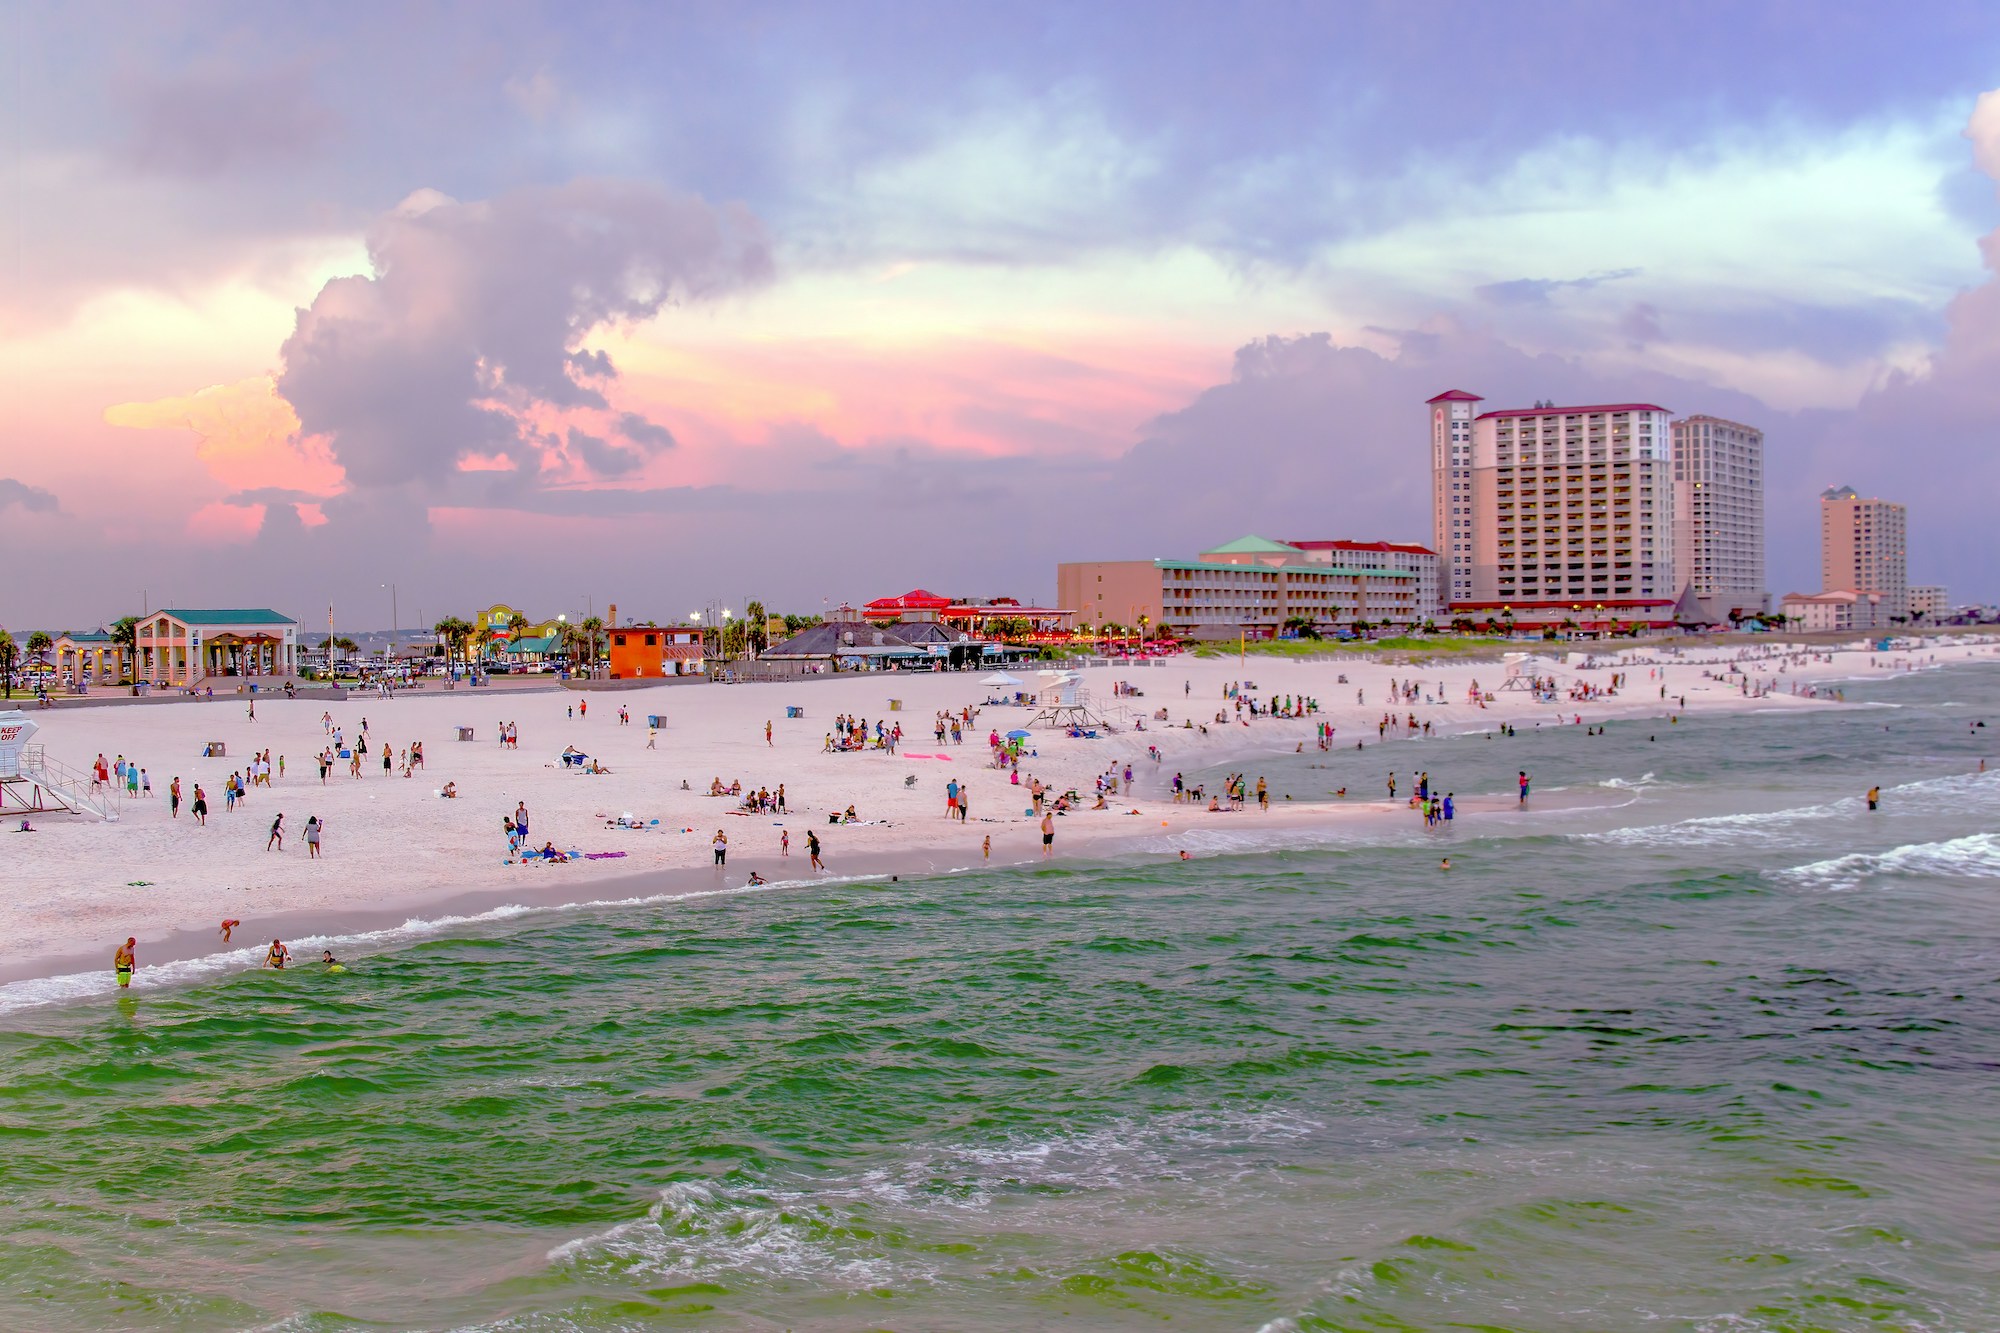 Top 10 Mistakes to Avoid When Visiting Pensacola, FL